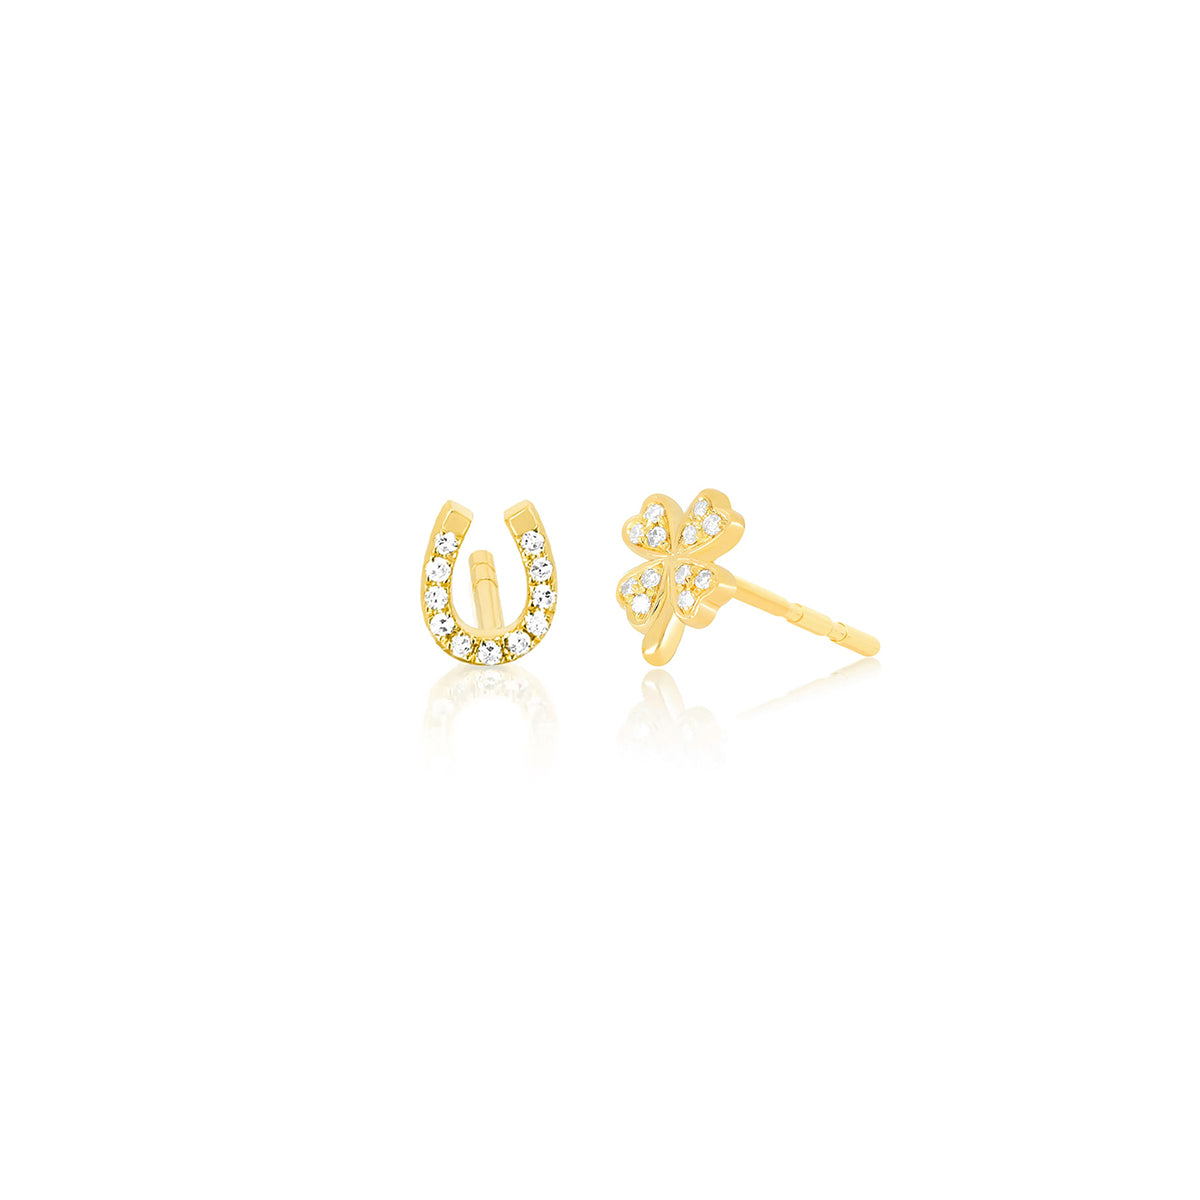 The Lucky Set in 14k Yellow Gold featuring 1 Horse Shoe Stud and 1 Clover Stud